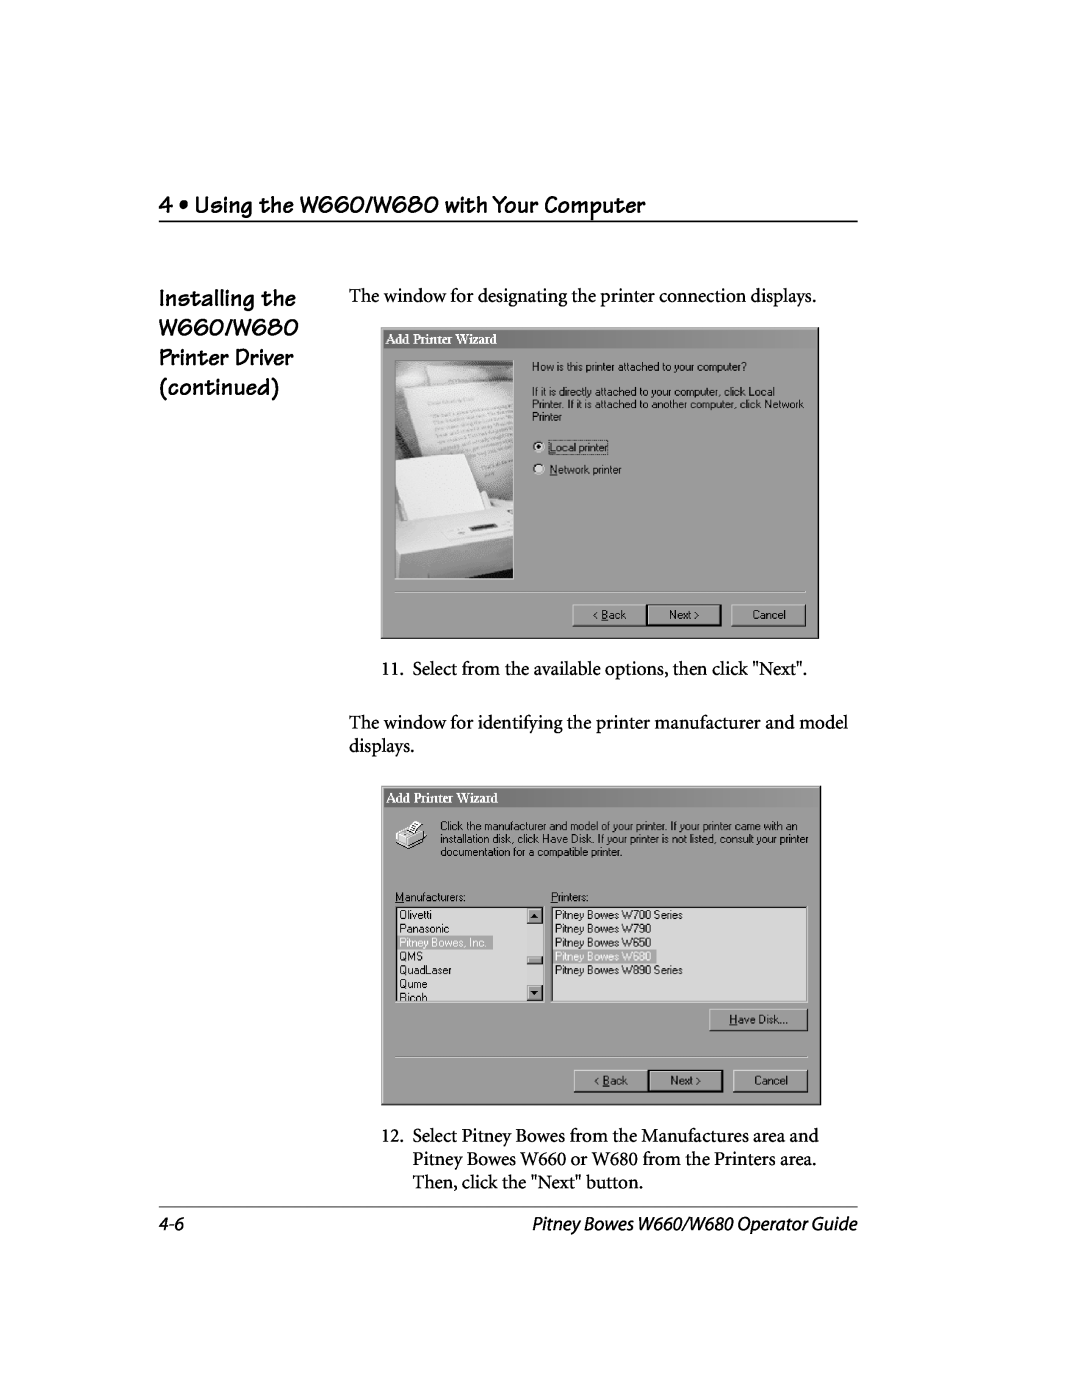 Pitney Bowes manual Using the W660/W680 with Your Computer, Installing the W660/W680 Printer Driver continued 